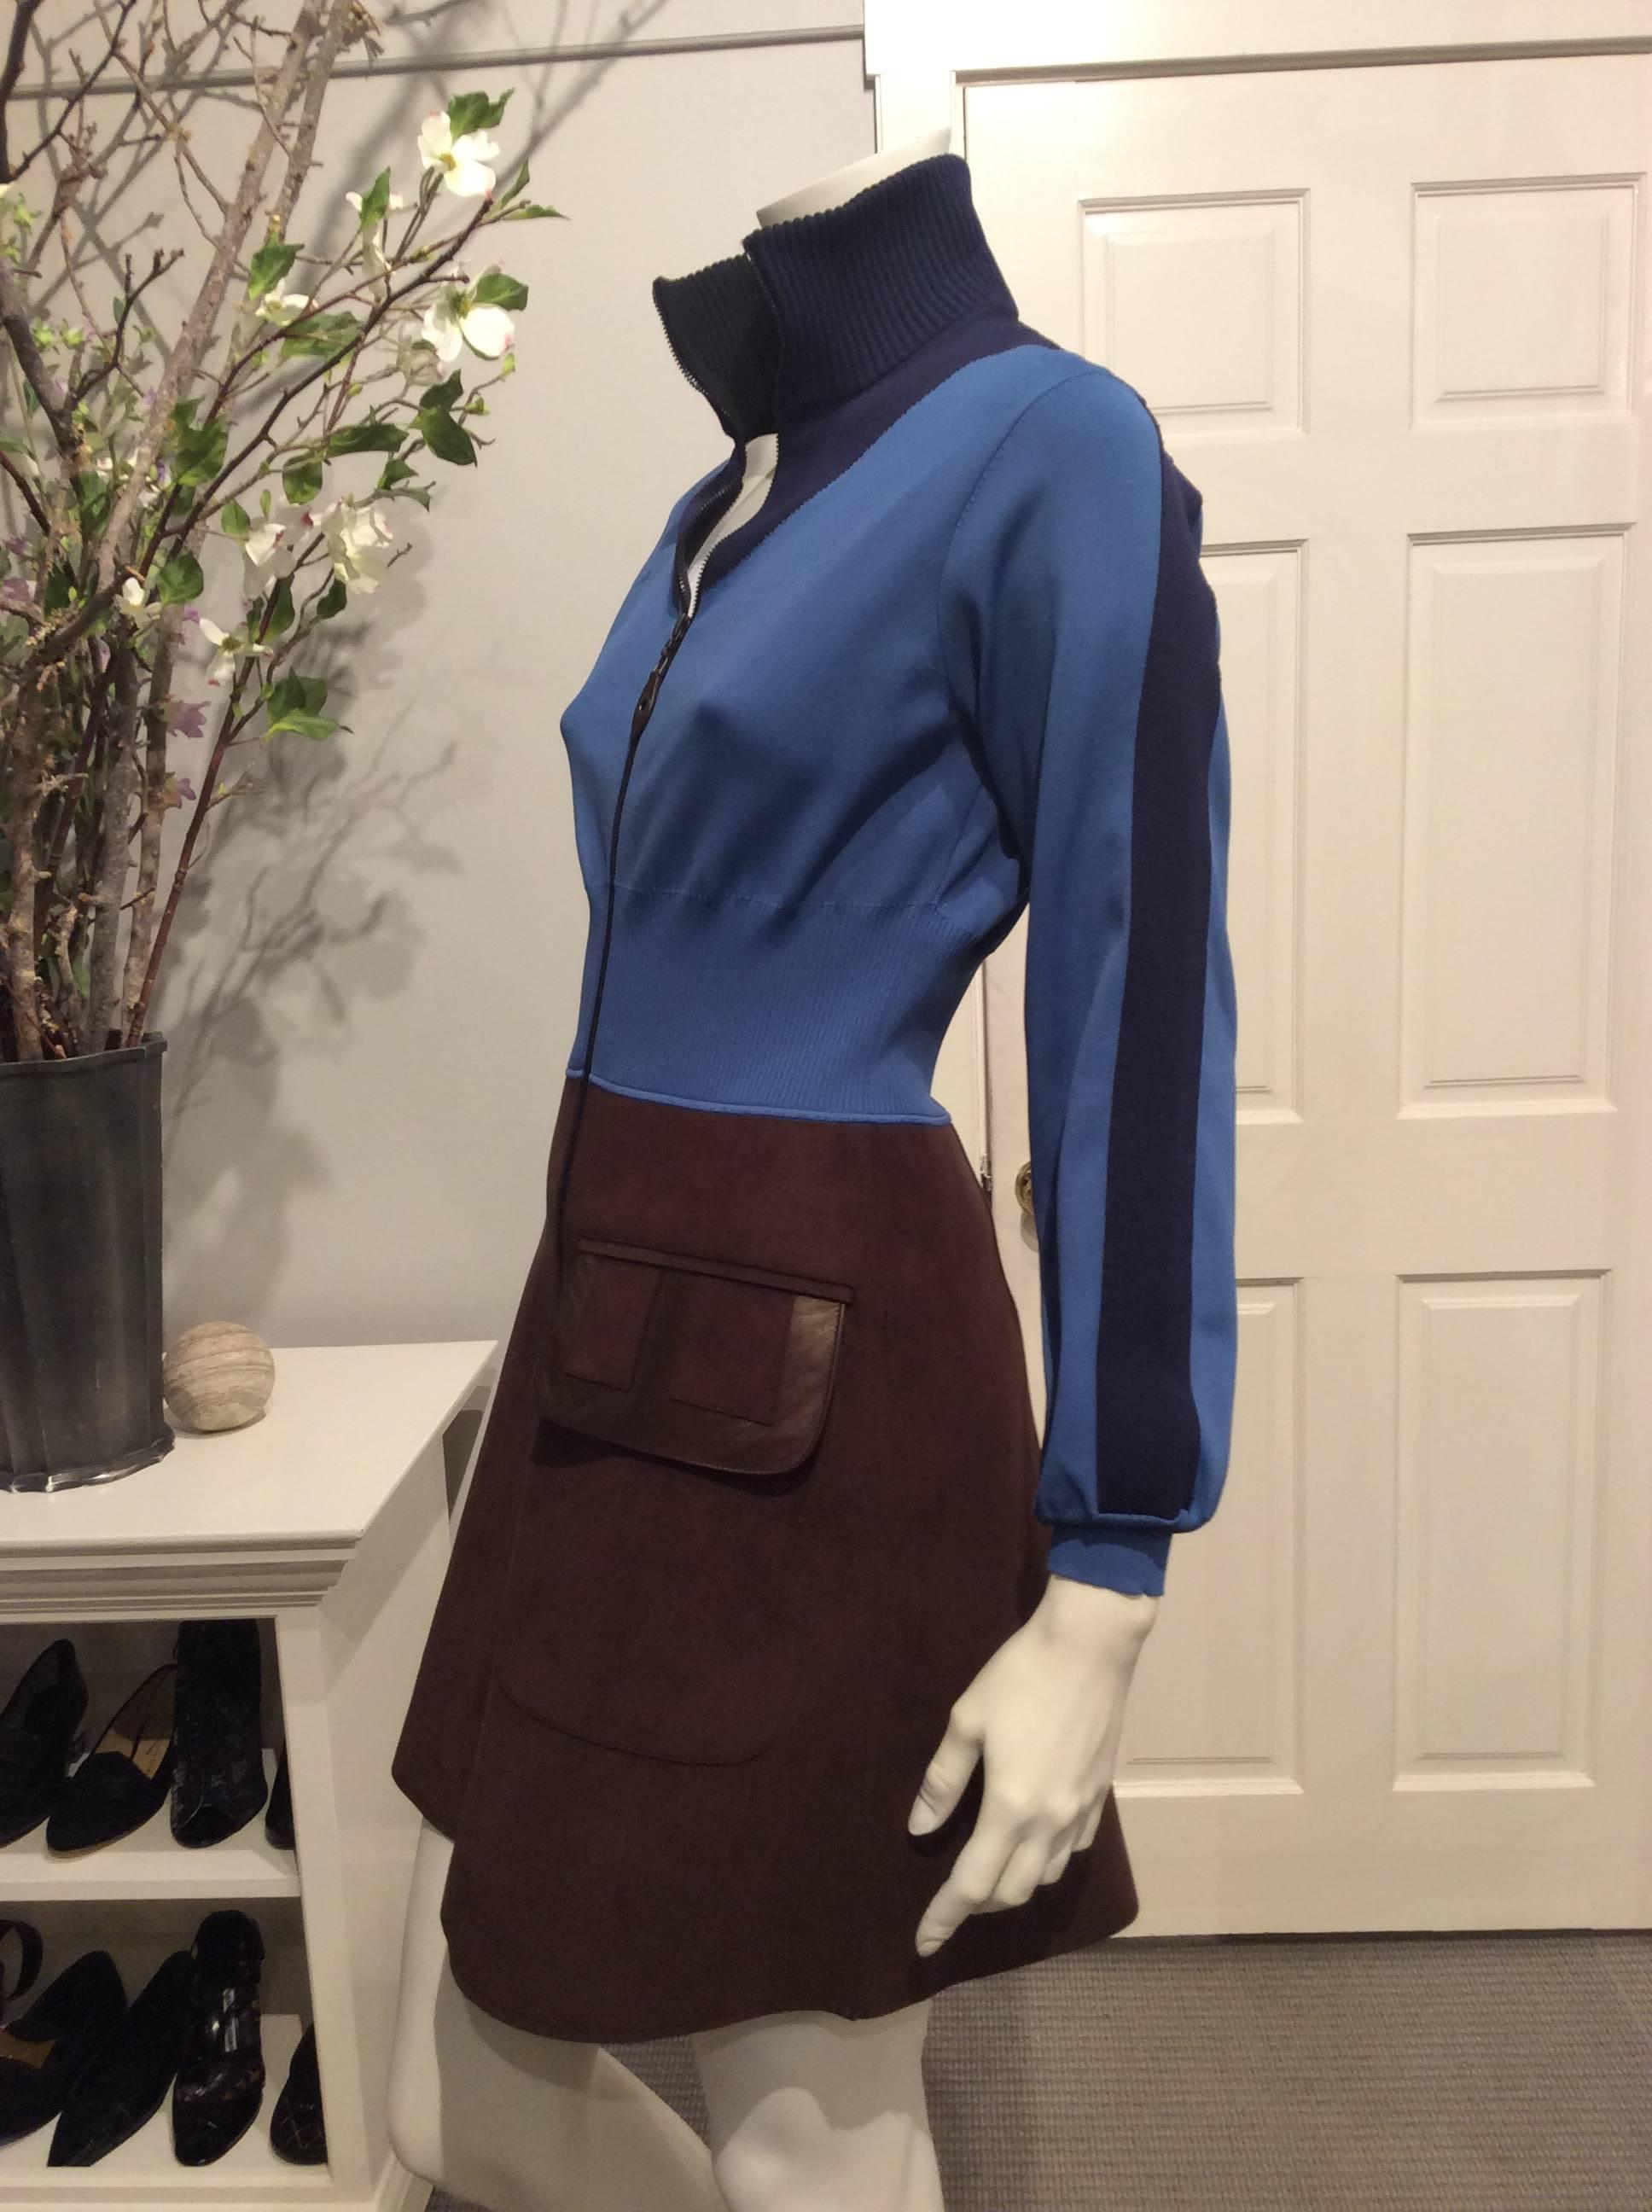 Sporty Louis Vuitton coatdress with a mock blouson upper part in teal and navy and a brown flared ultra suede skirt with an oversized flap pocket trimmed in leather.  It has a long zipper that goes almost the whole length of the dress and allows it